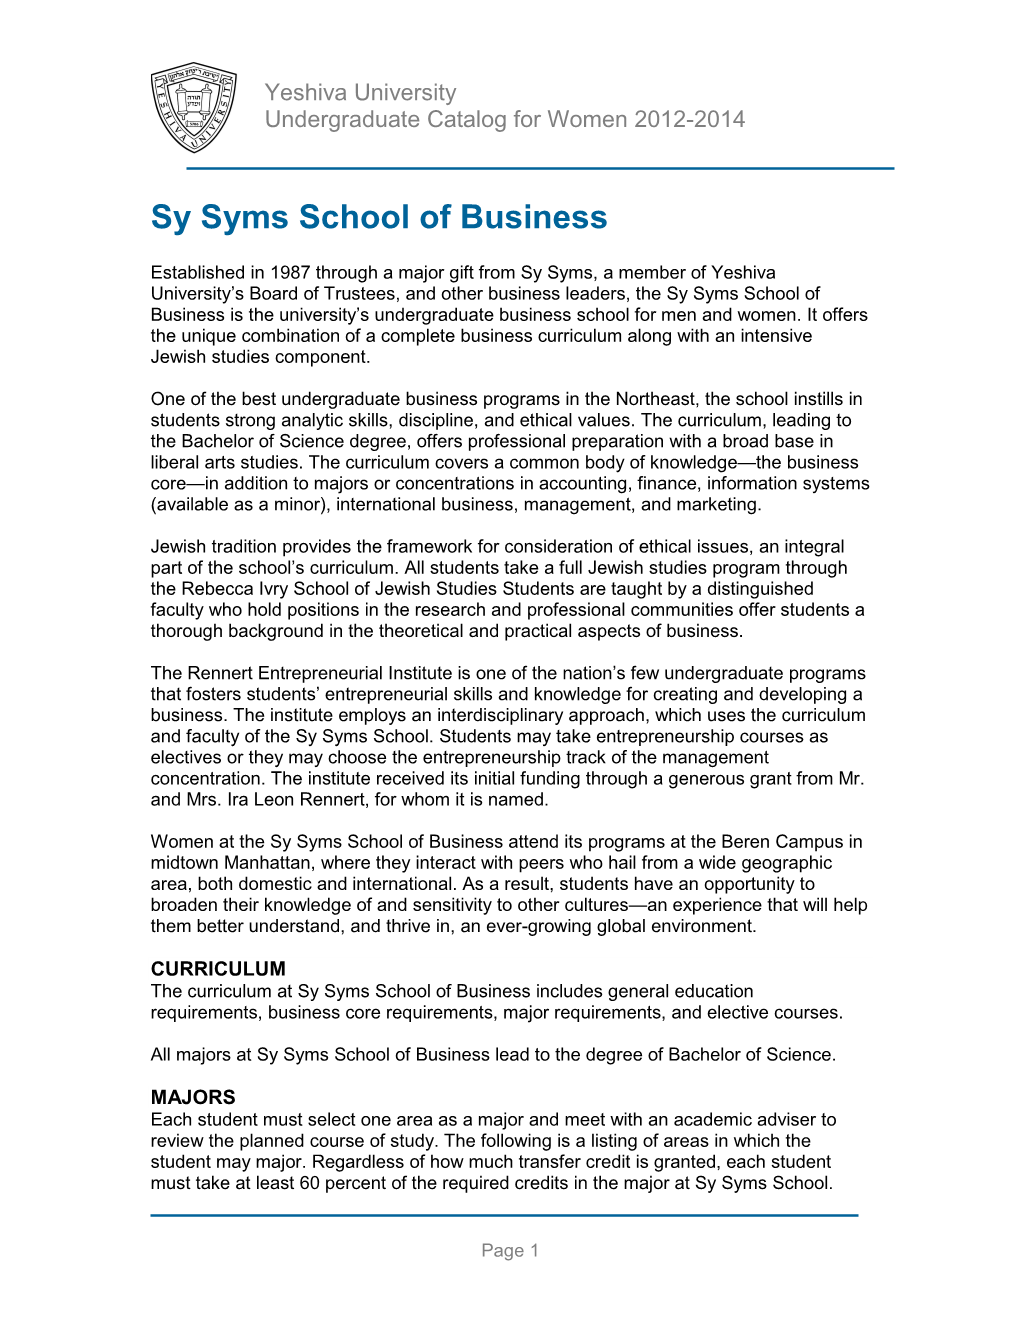 Sy Syms School of Business